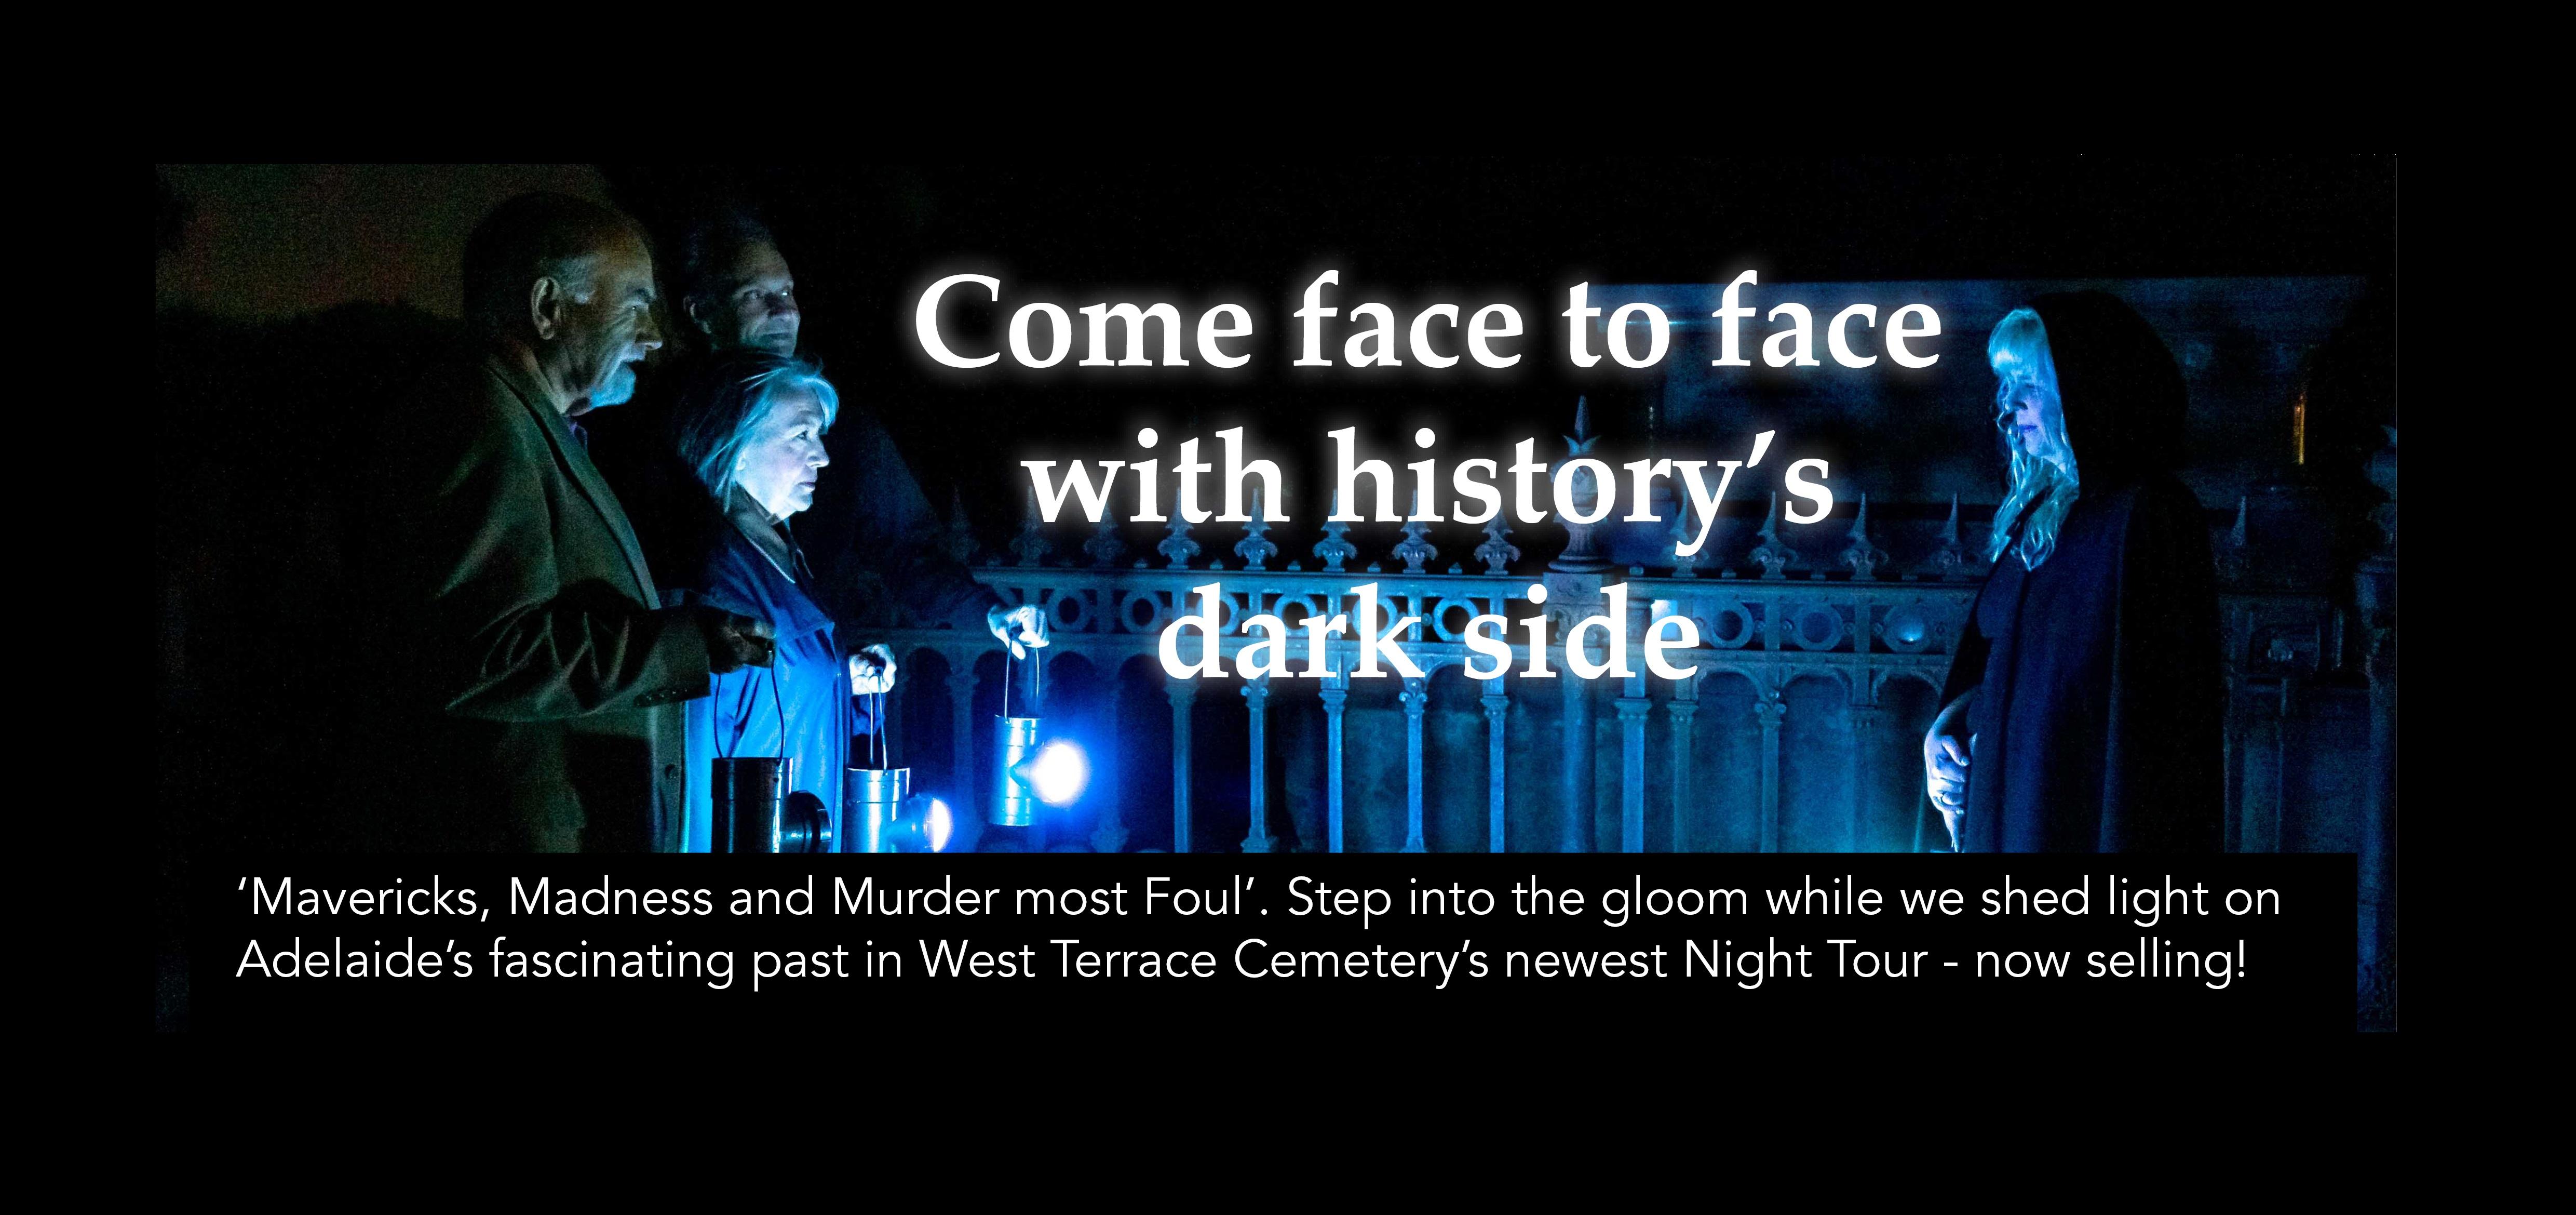 'Mavericks, Madness and Murder Most Foul!' - West Terrace Cemetery by Night Tour